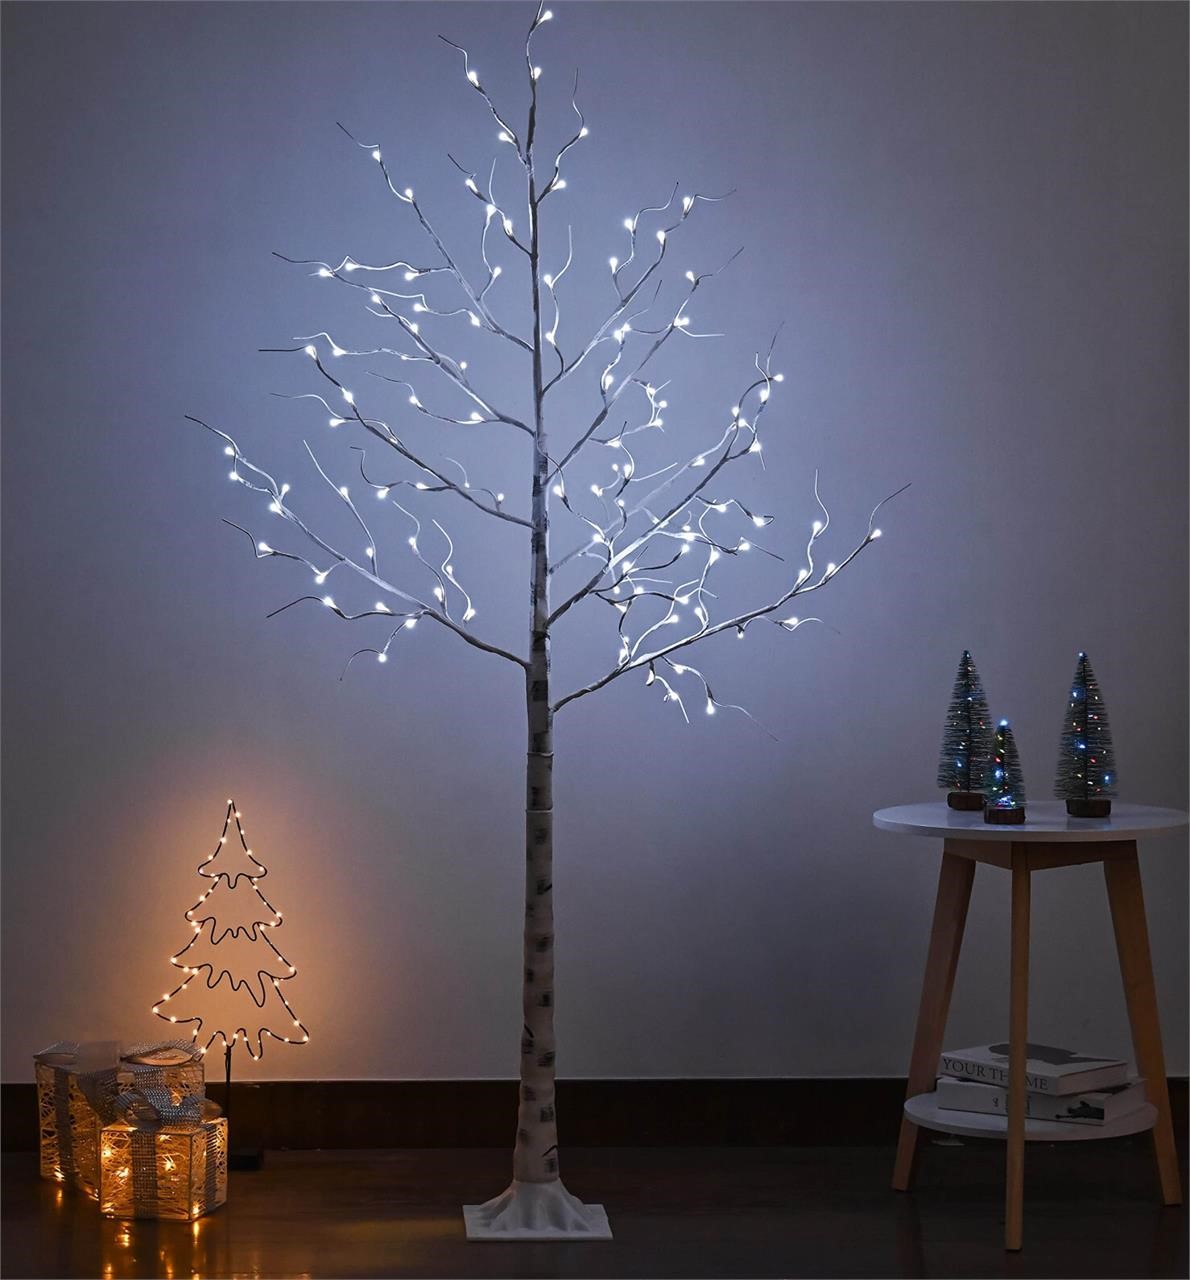 6Ft Lighted Birch Twig Tree with LED String Lights